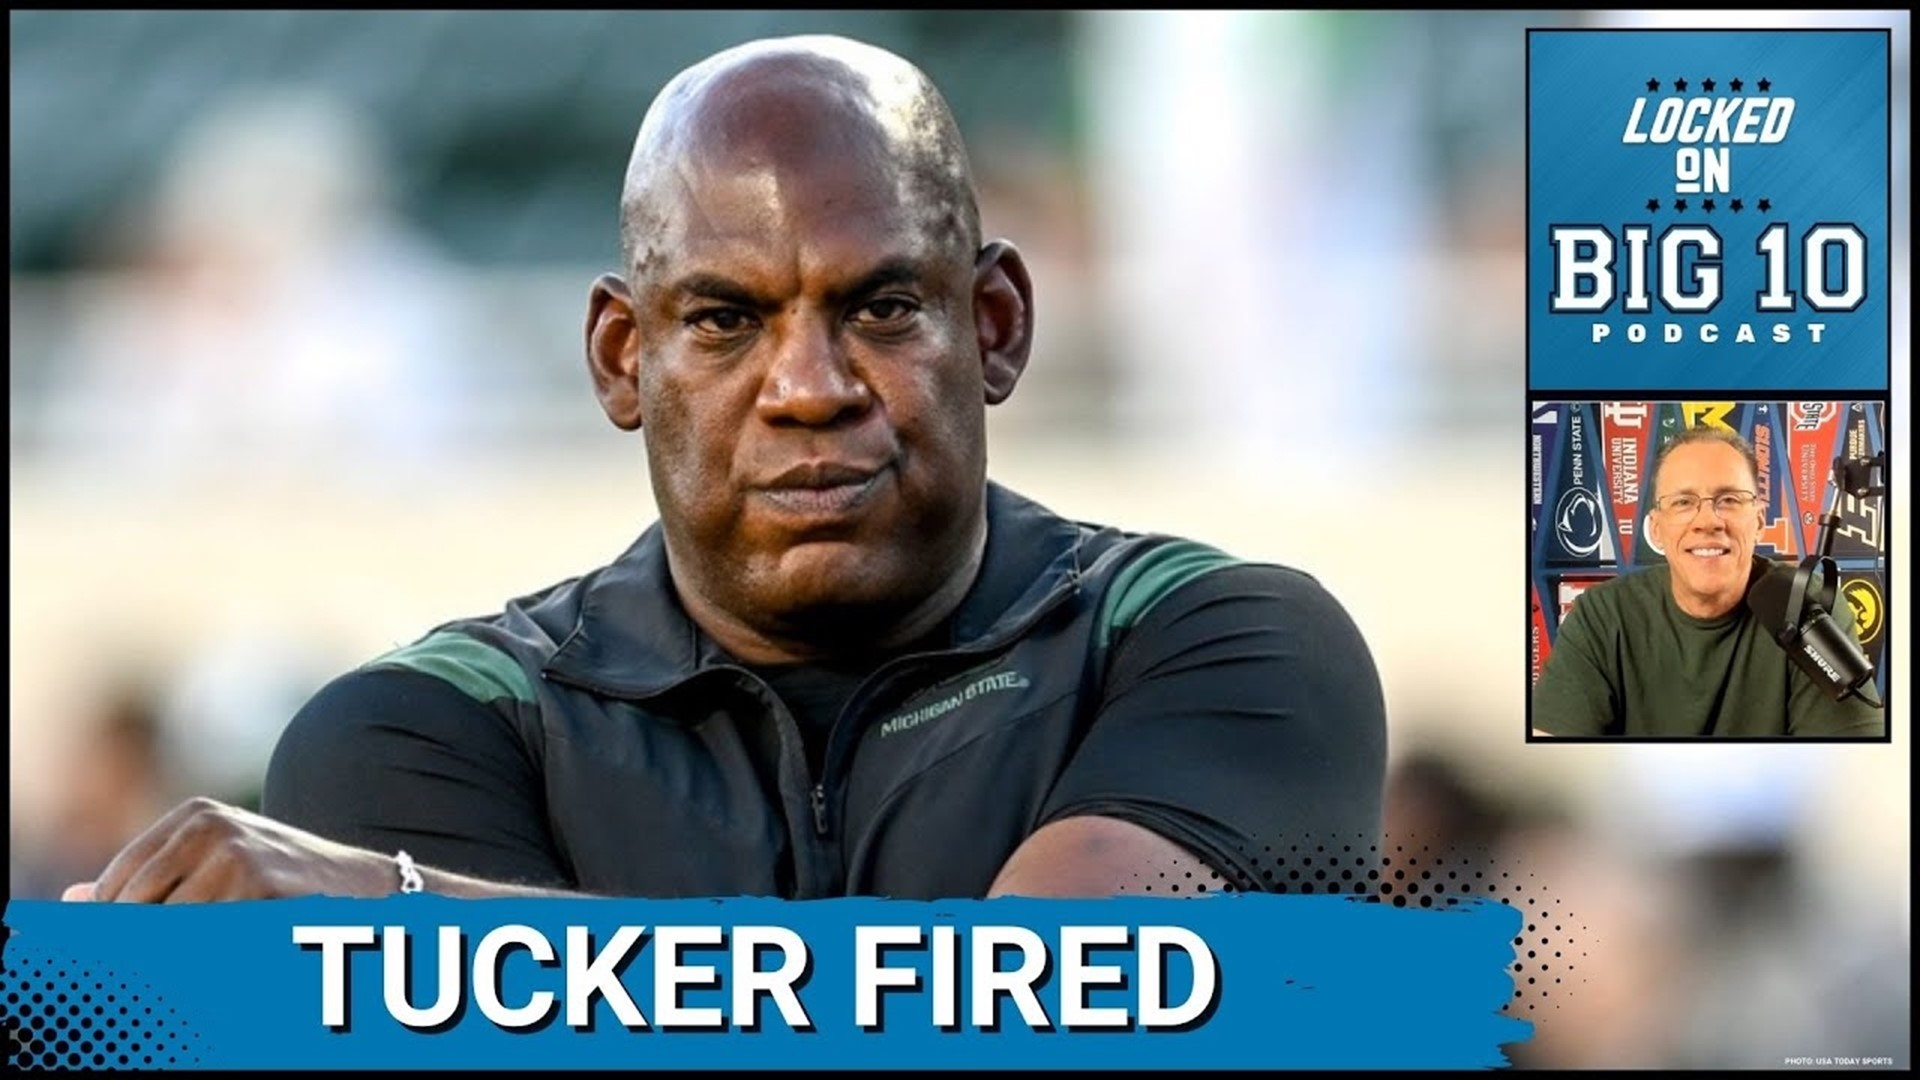 Michigan State informed football coach Mel Tucker he will be fired September 26th for cause.  The school suspended Tucker on September 10th